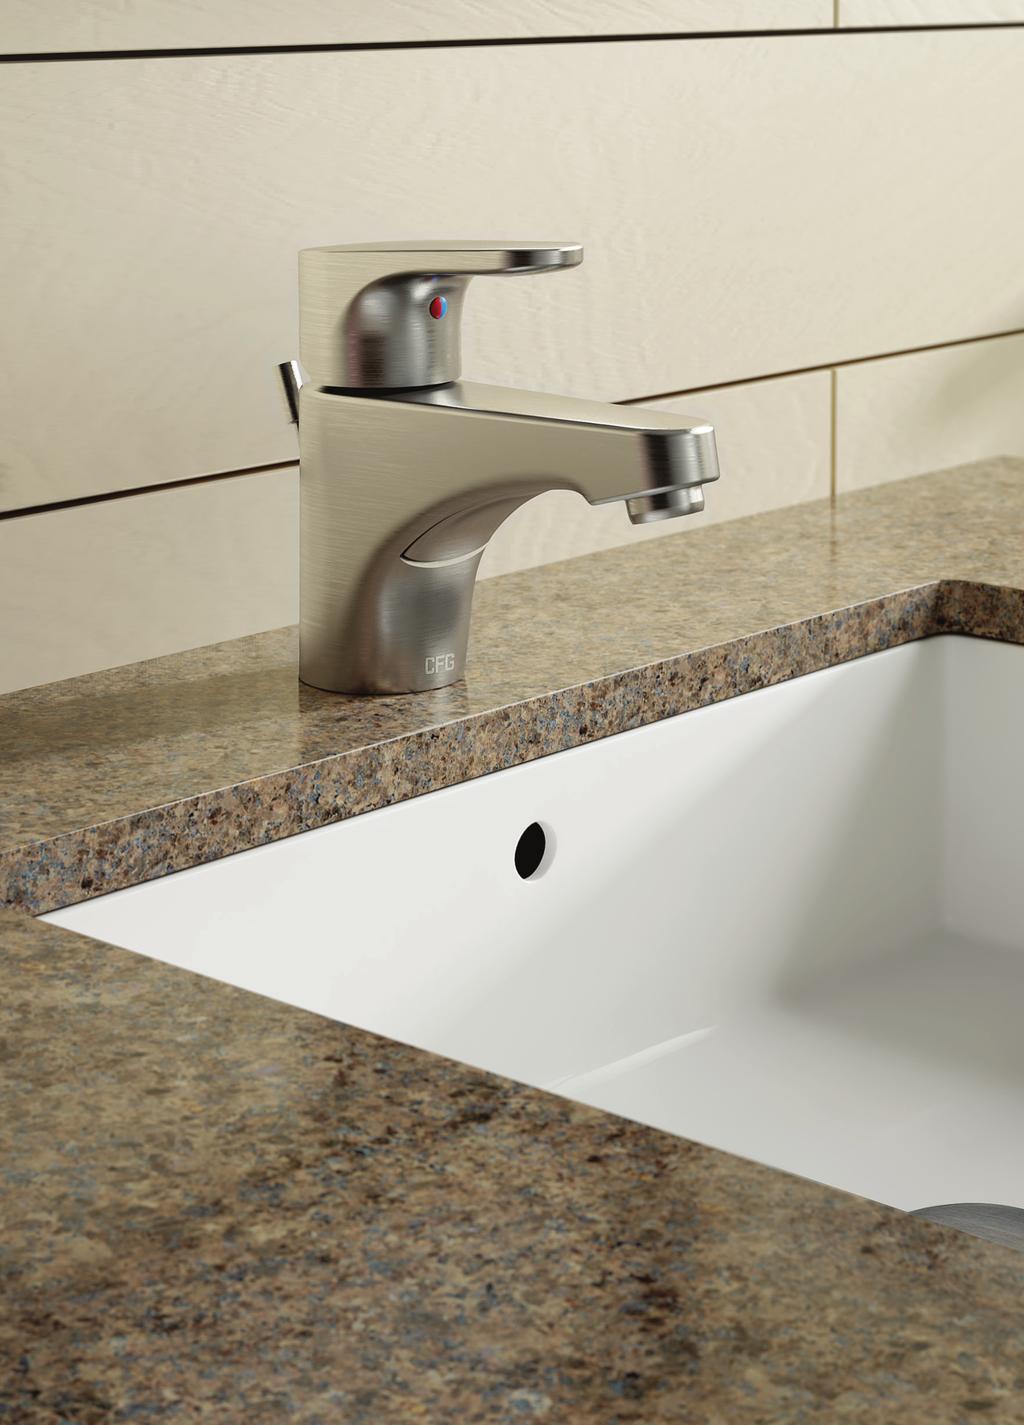 Cleveland Faucet Group, a incorporated brand, delivers quality products with lower maintenance costs and faster installation.